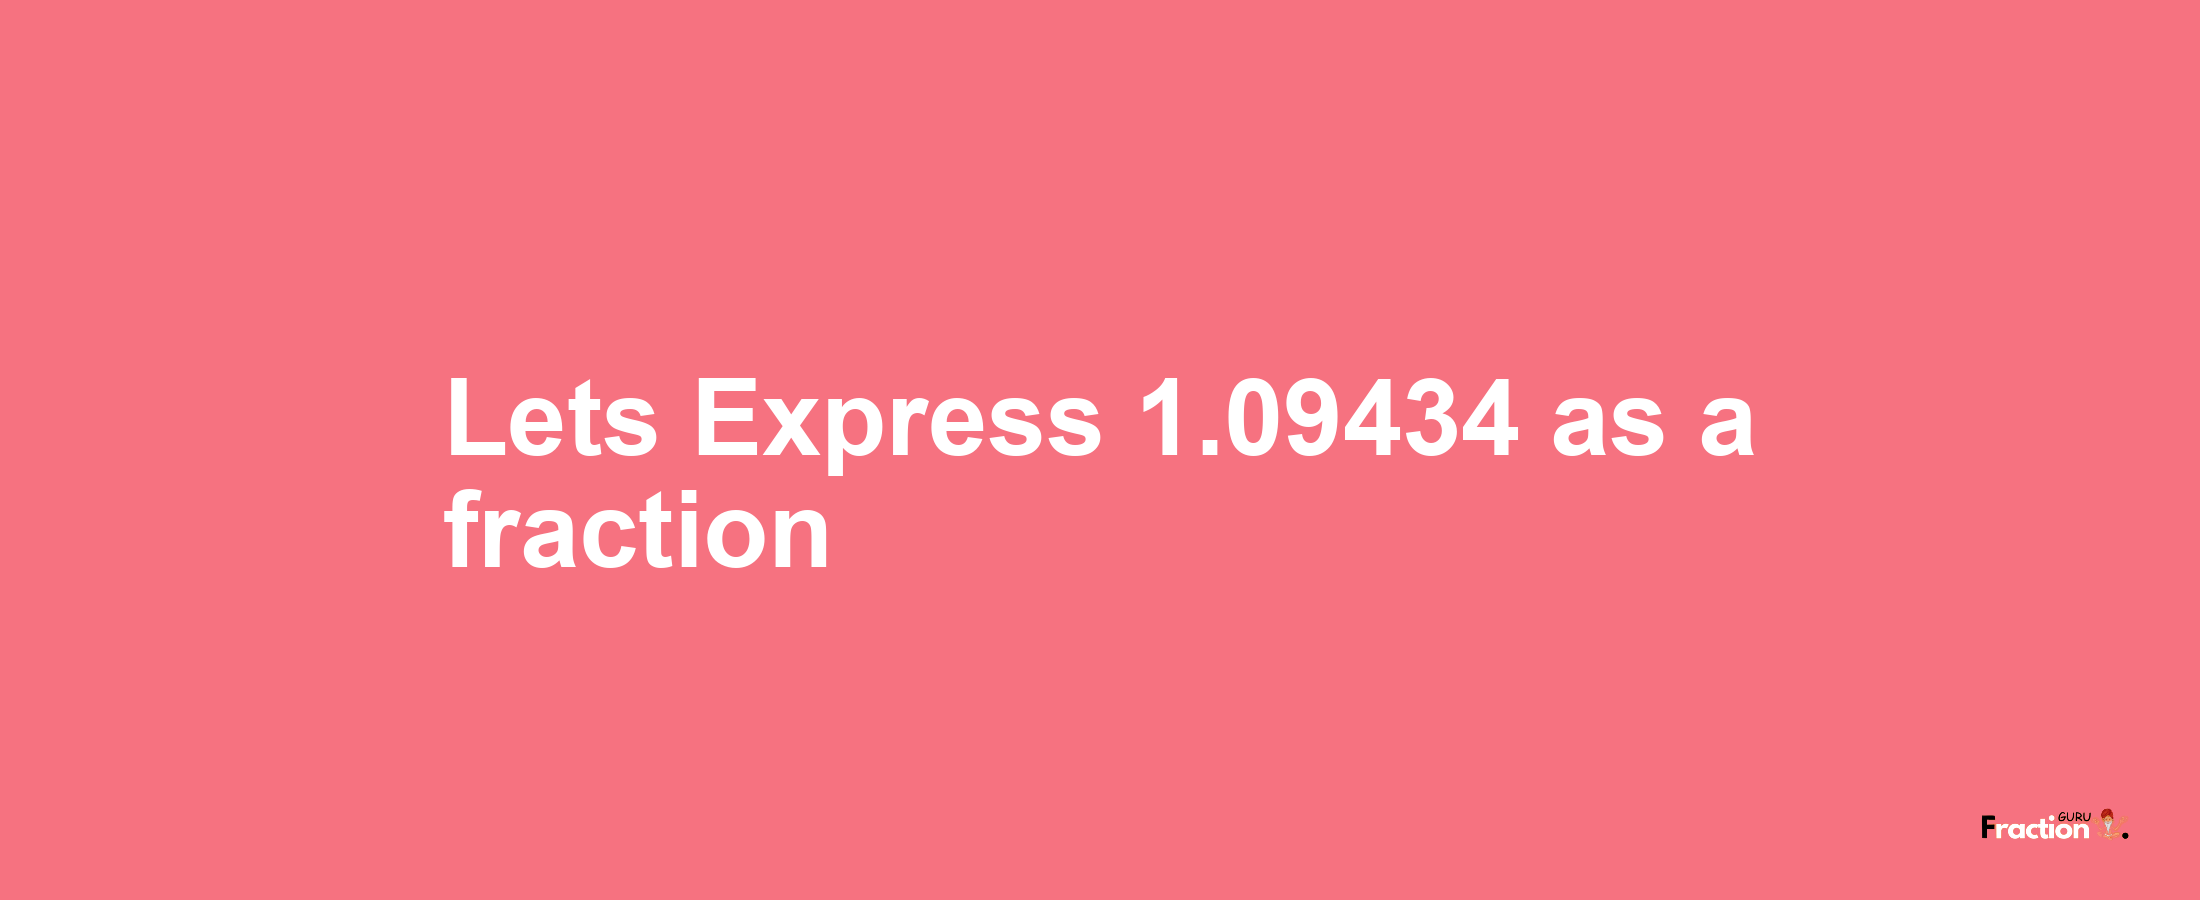 Lets Express 1.09434 as afraction